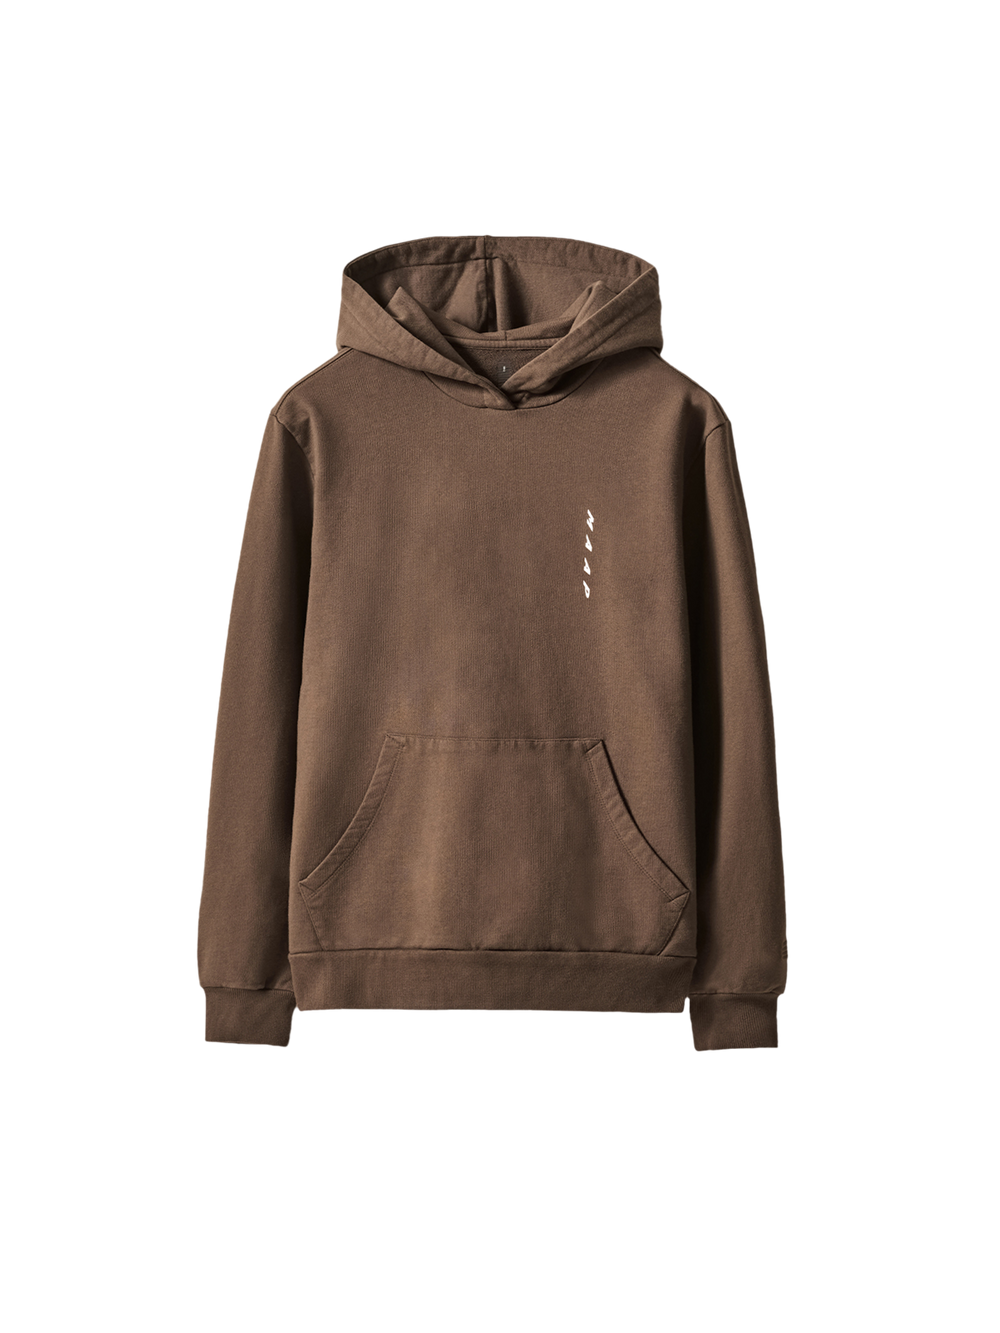 Product Image for Evade Hoodie